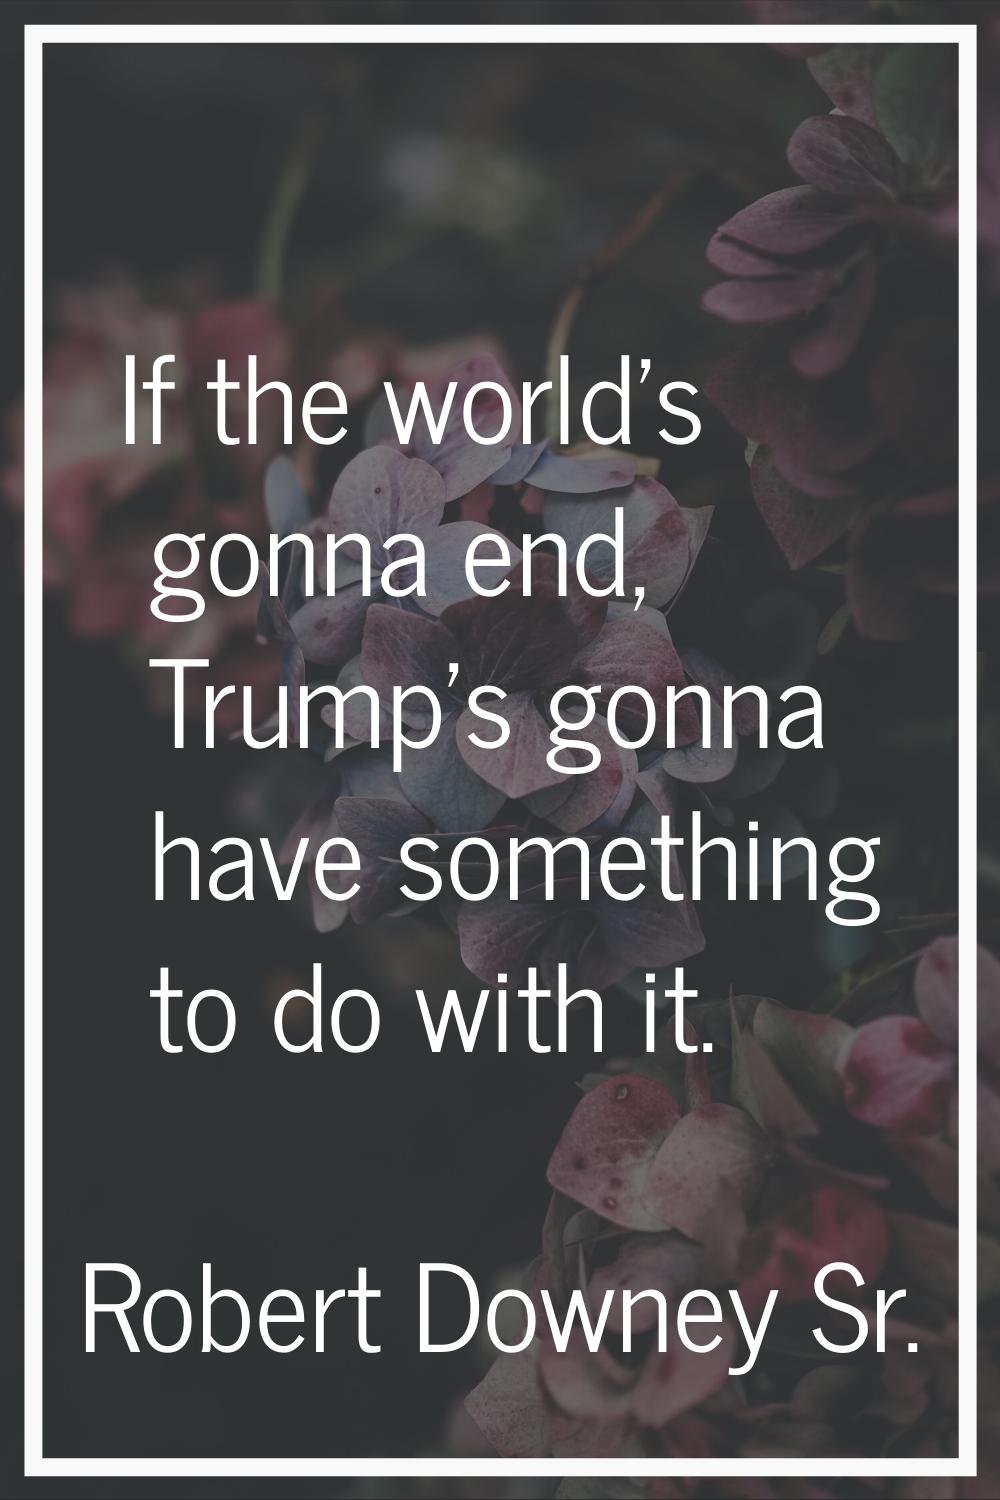 If the world's gonna end, Trump's gonna have something to do with it.